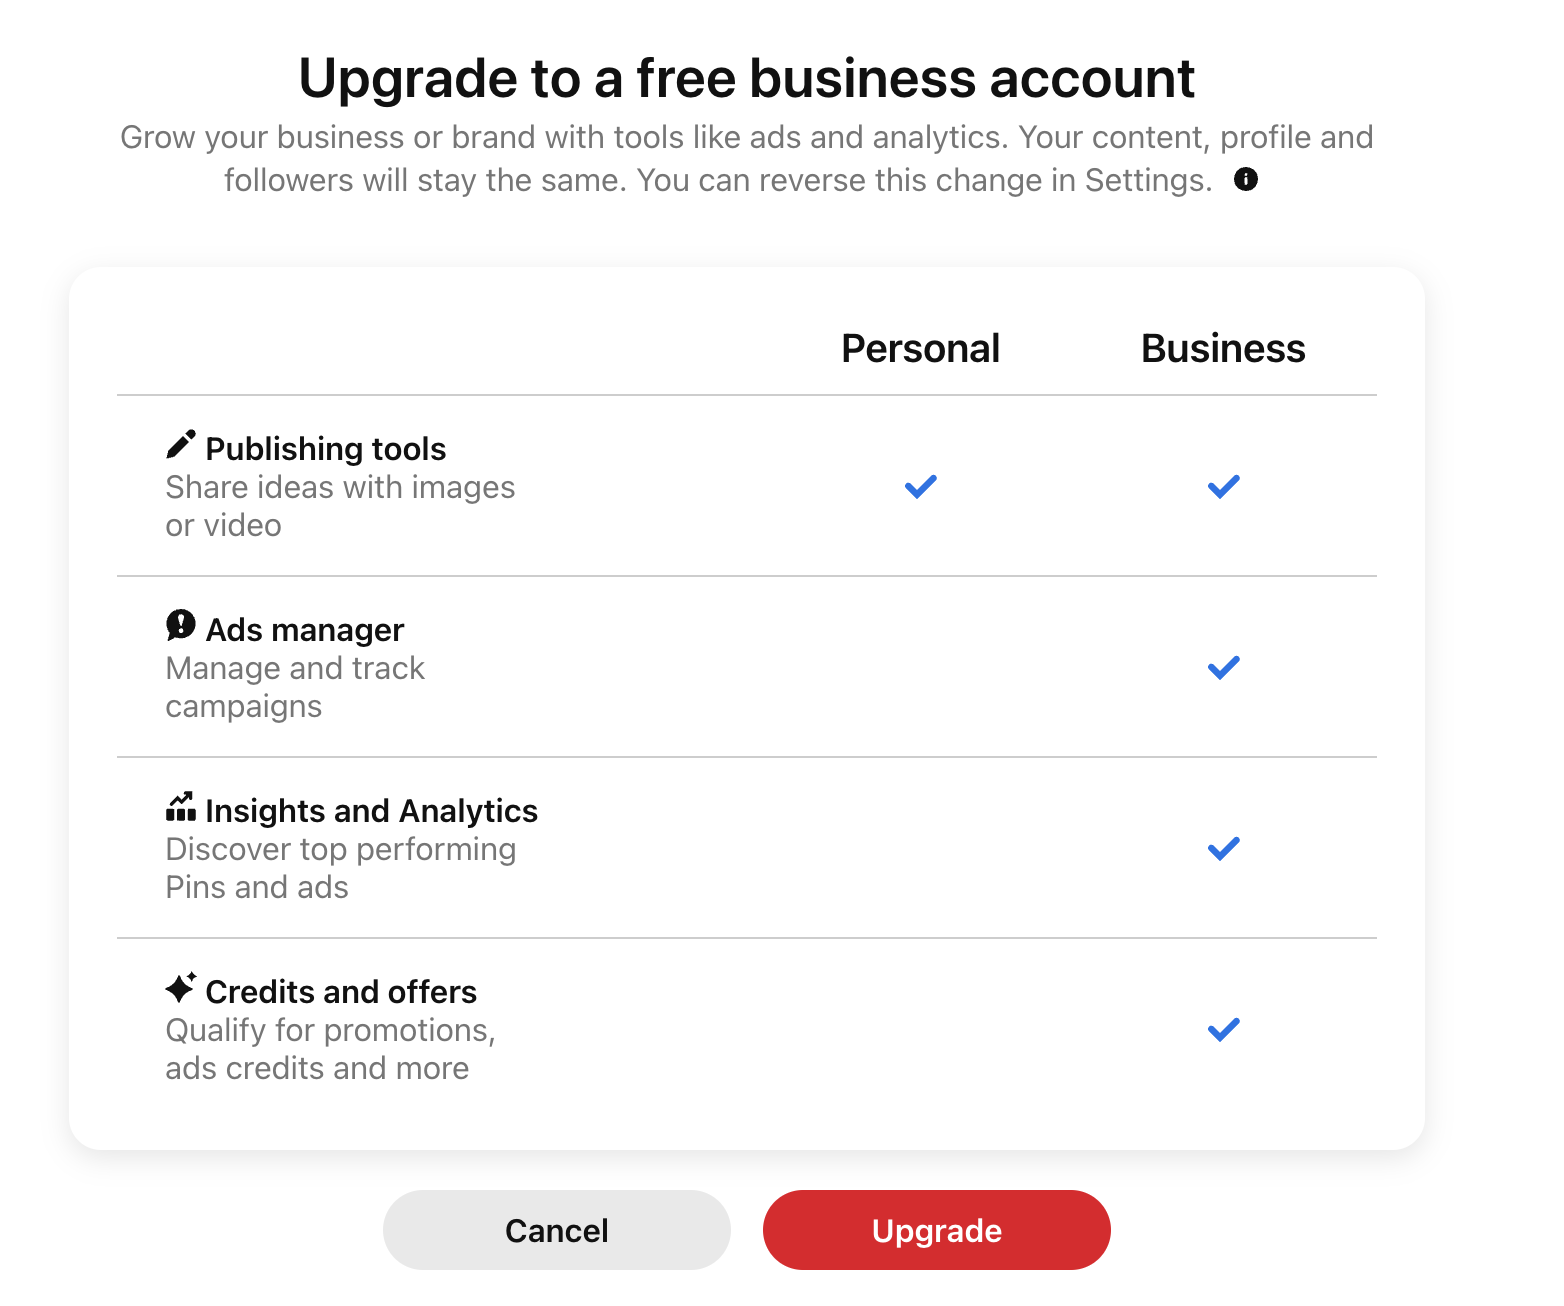 How to upgrade to a business account on Pinterest